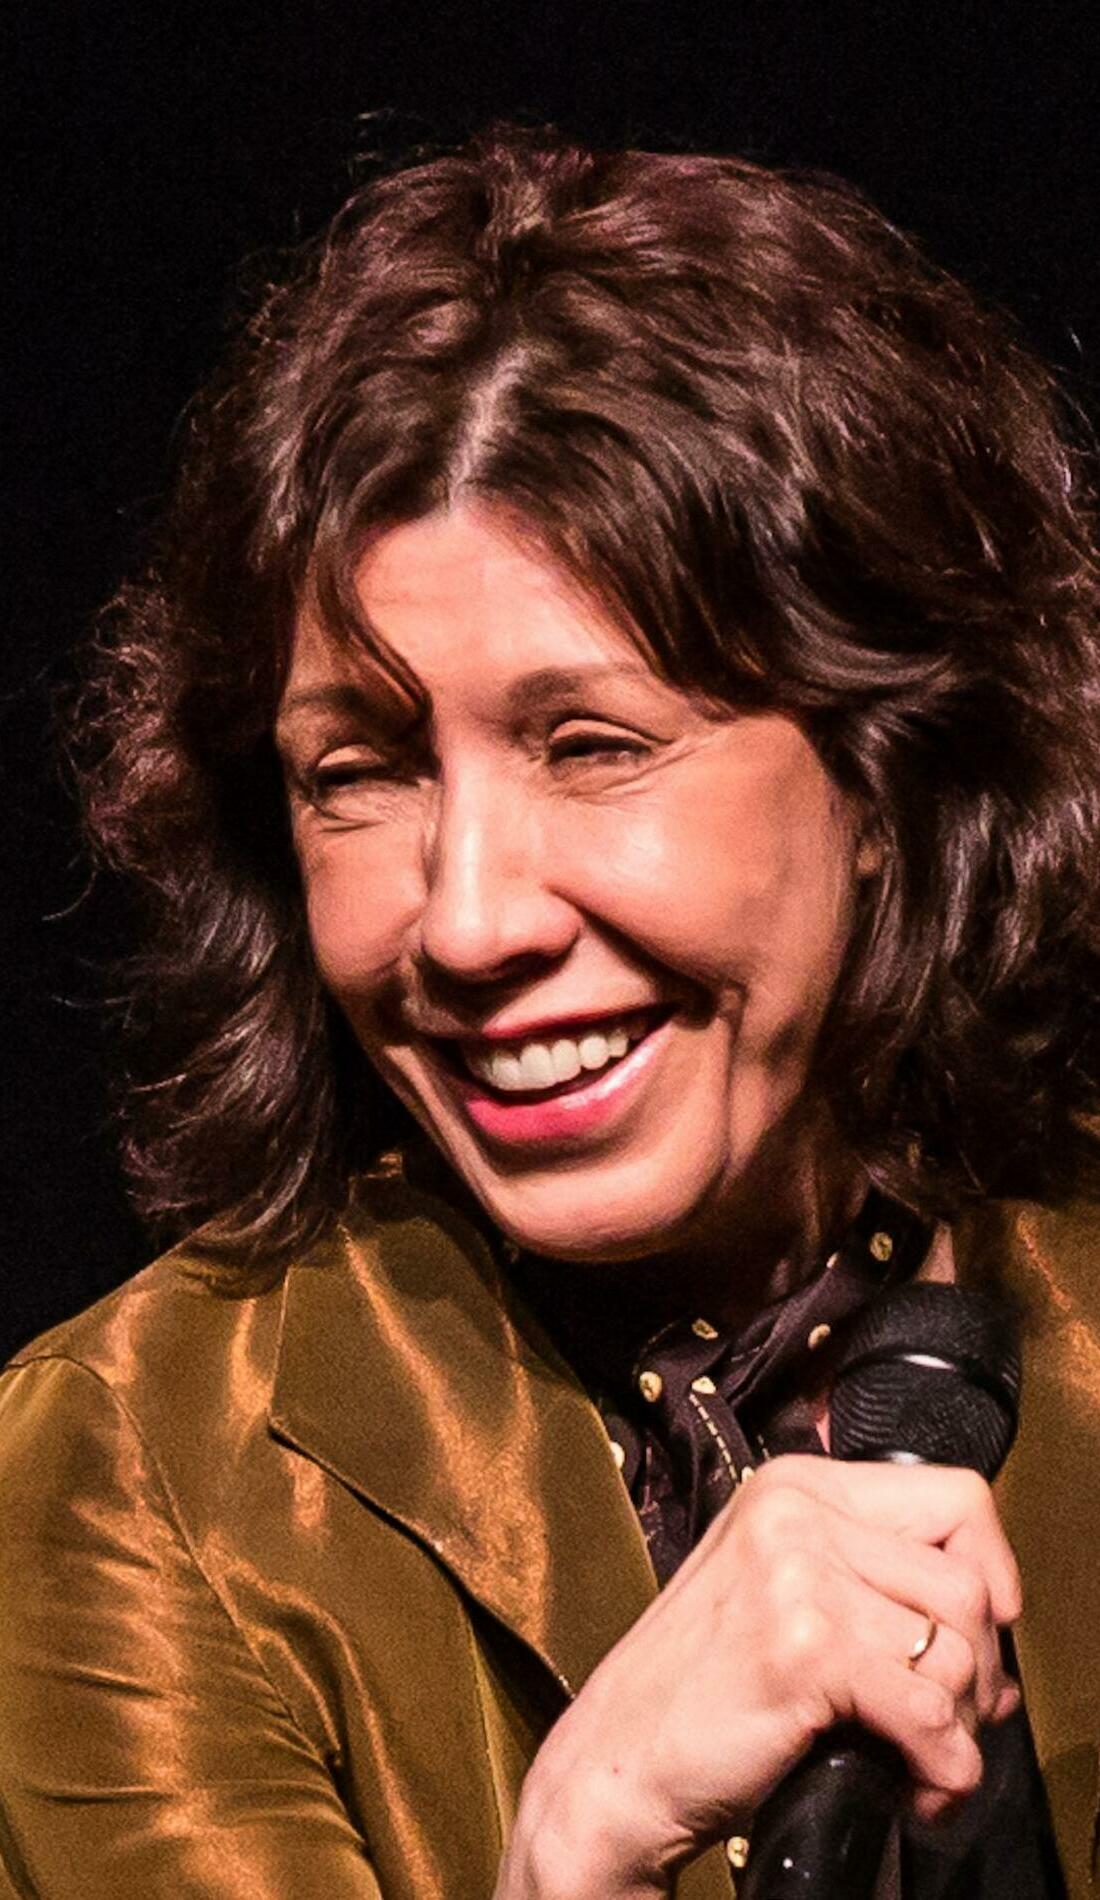 A Lily Tomlin live event